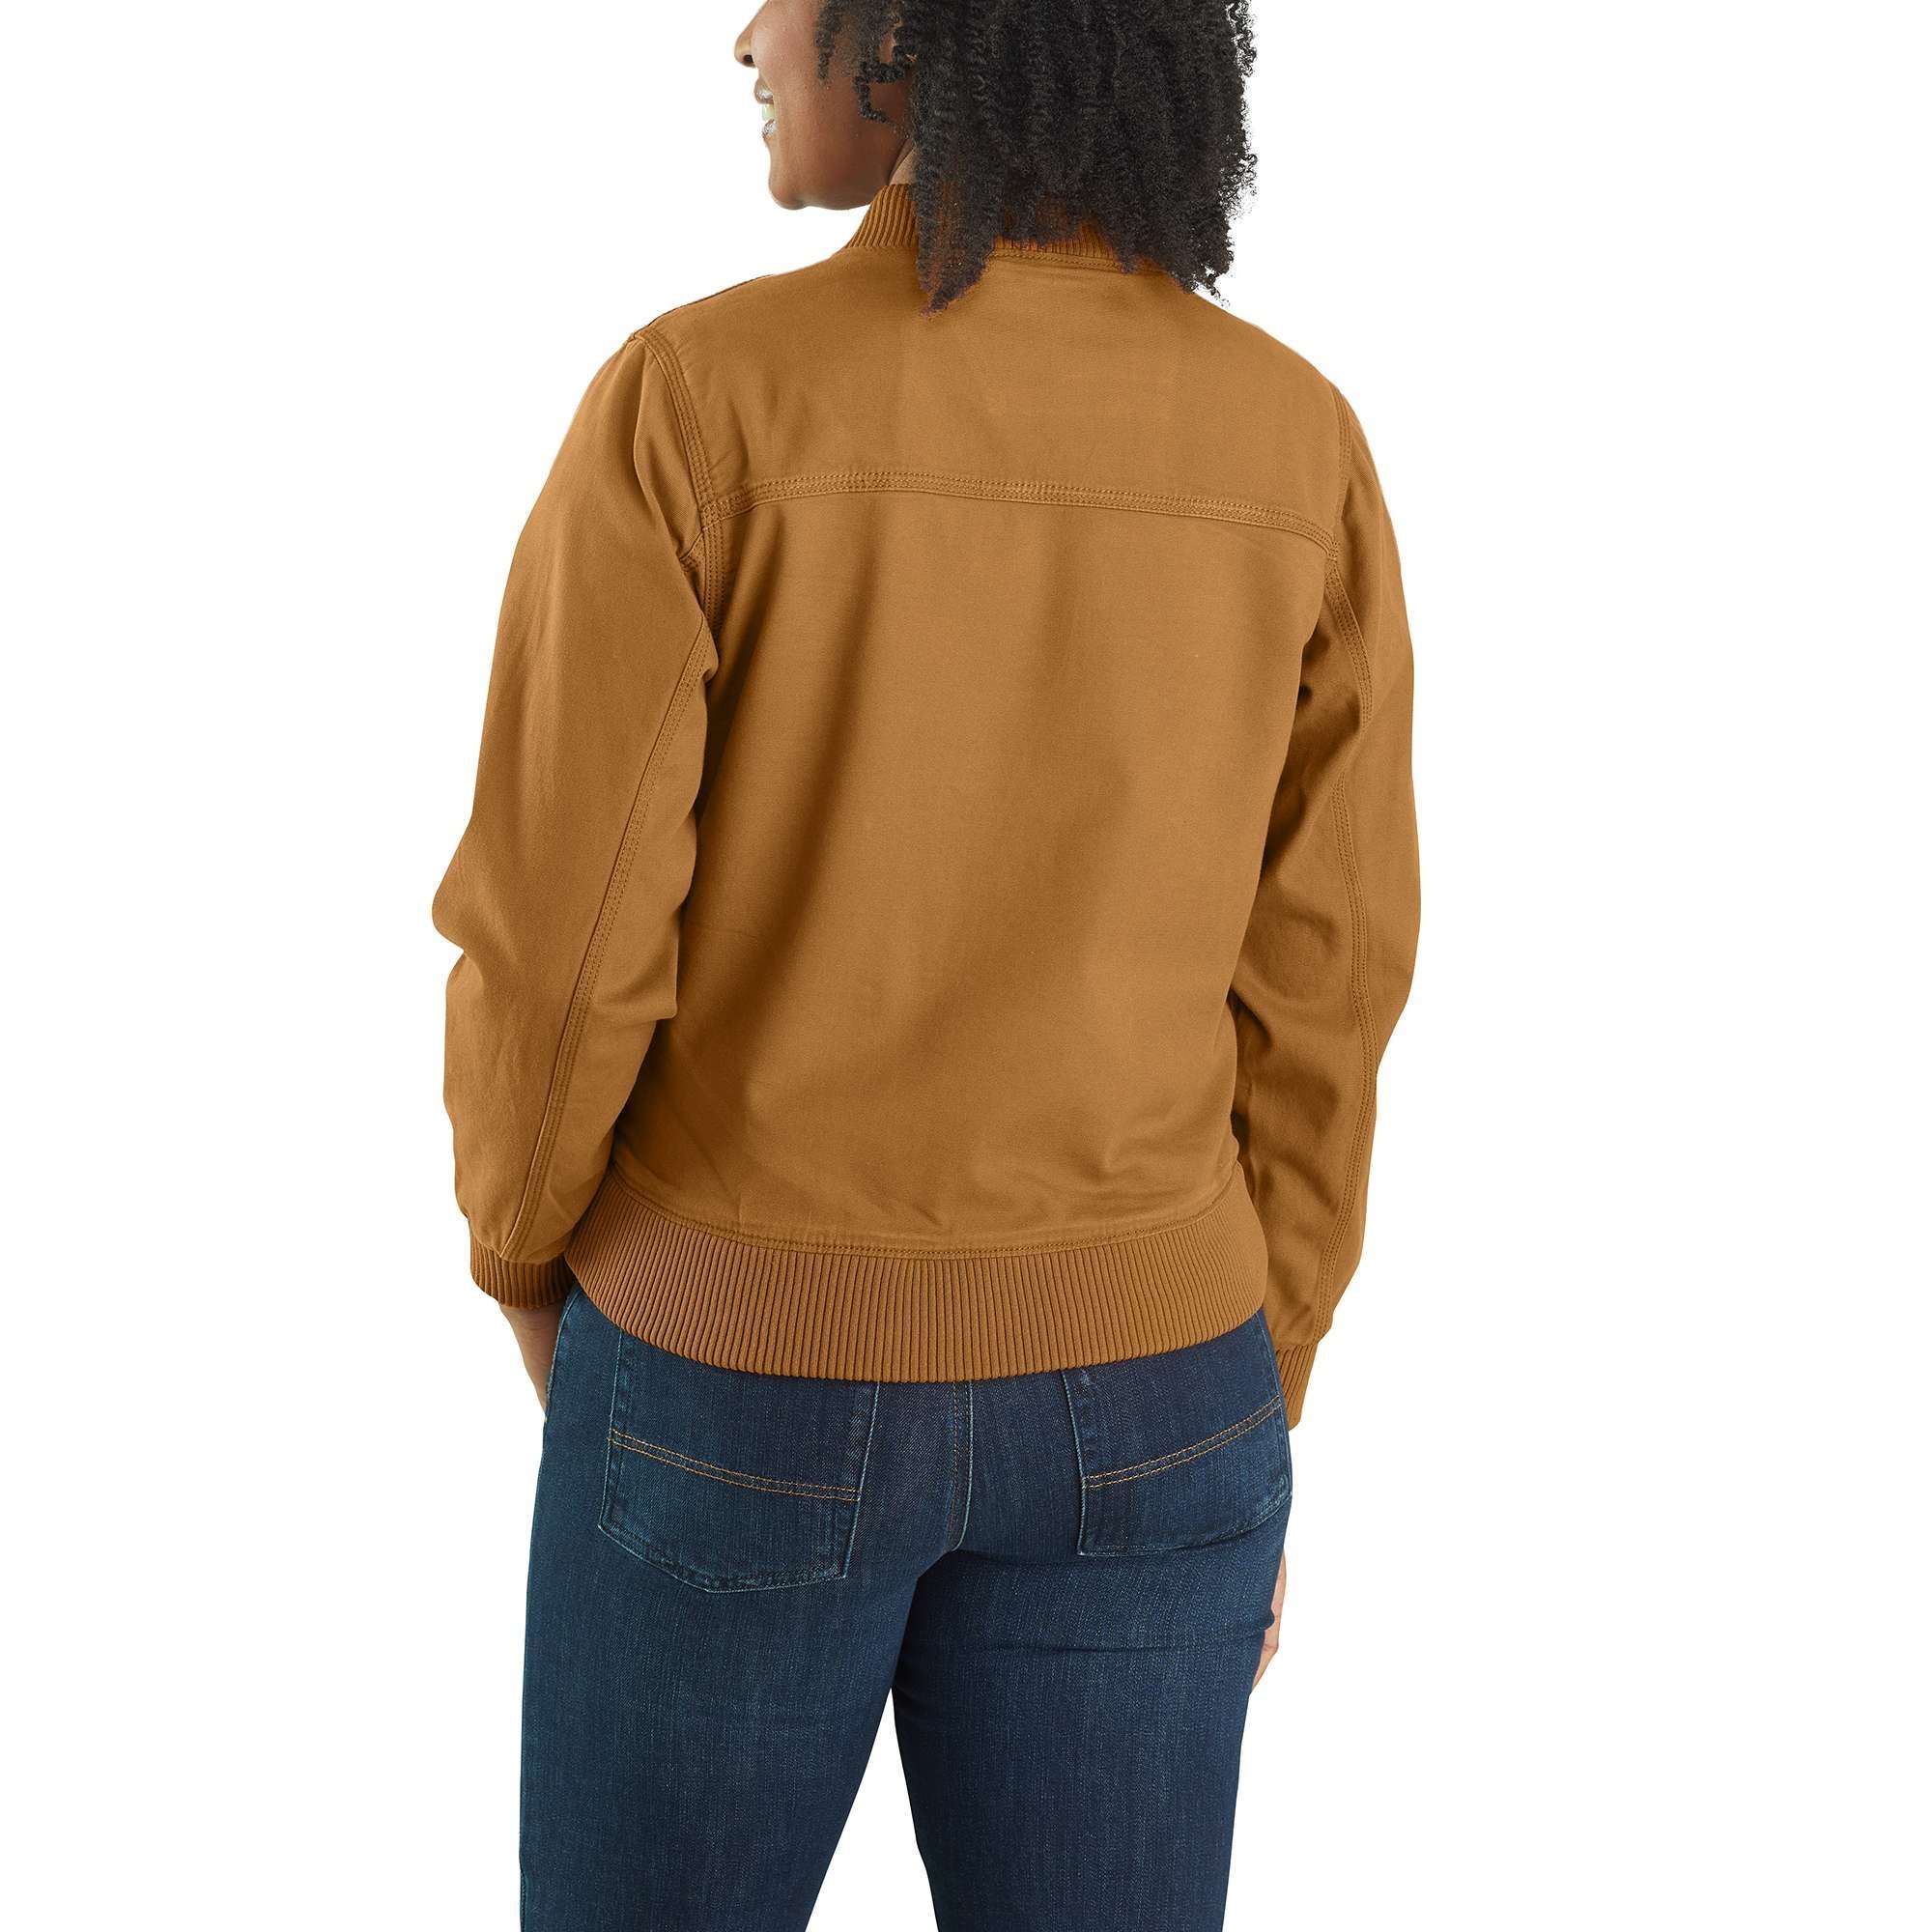 Carhartt Crawford Bomber Jacket Vestes, Brown, XS Taille Normale Femme :  : Mode